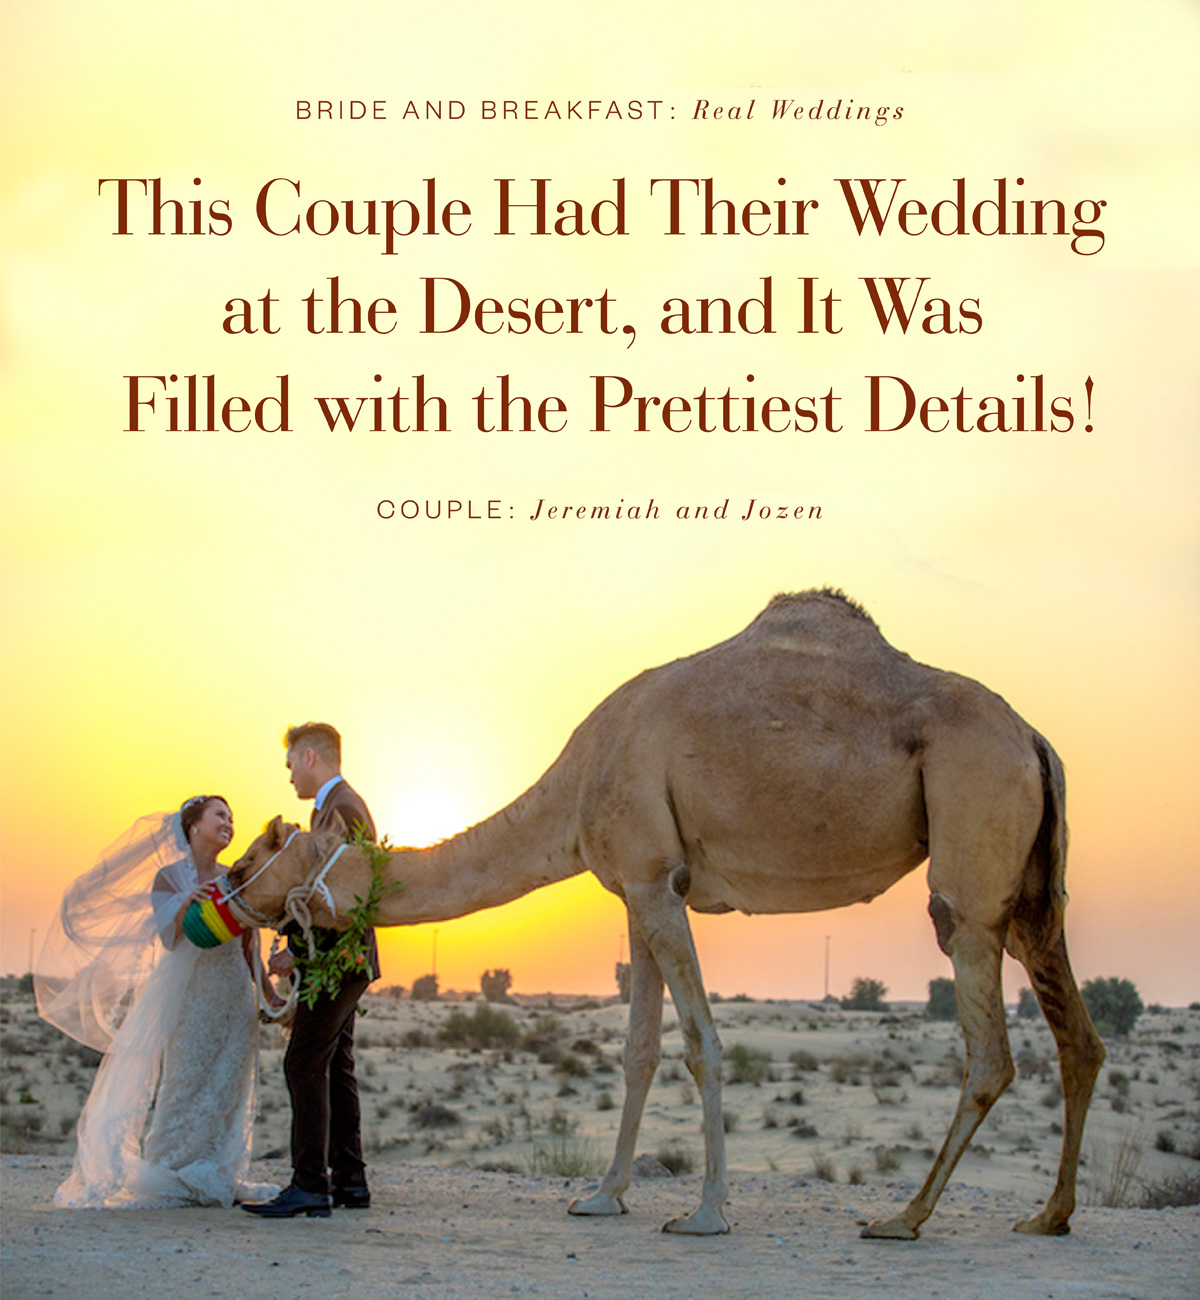 This Couple Had Their Wedding at the Desert, and It Was Filled with the Prettiest Details!